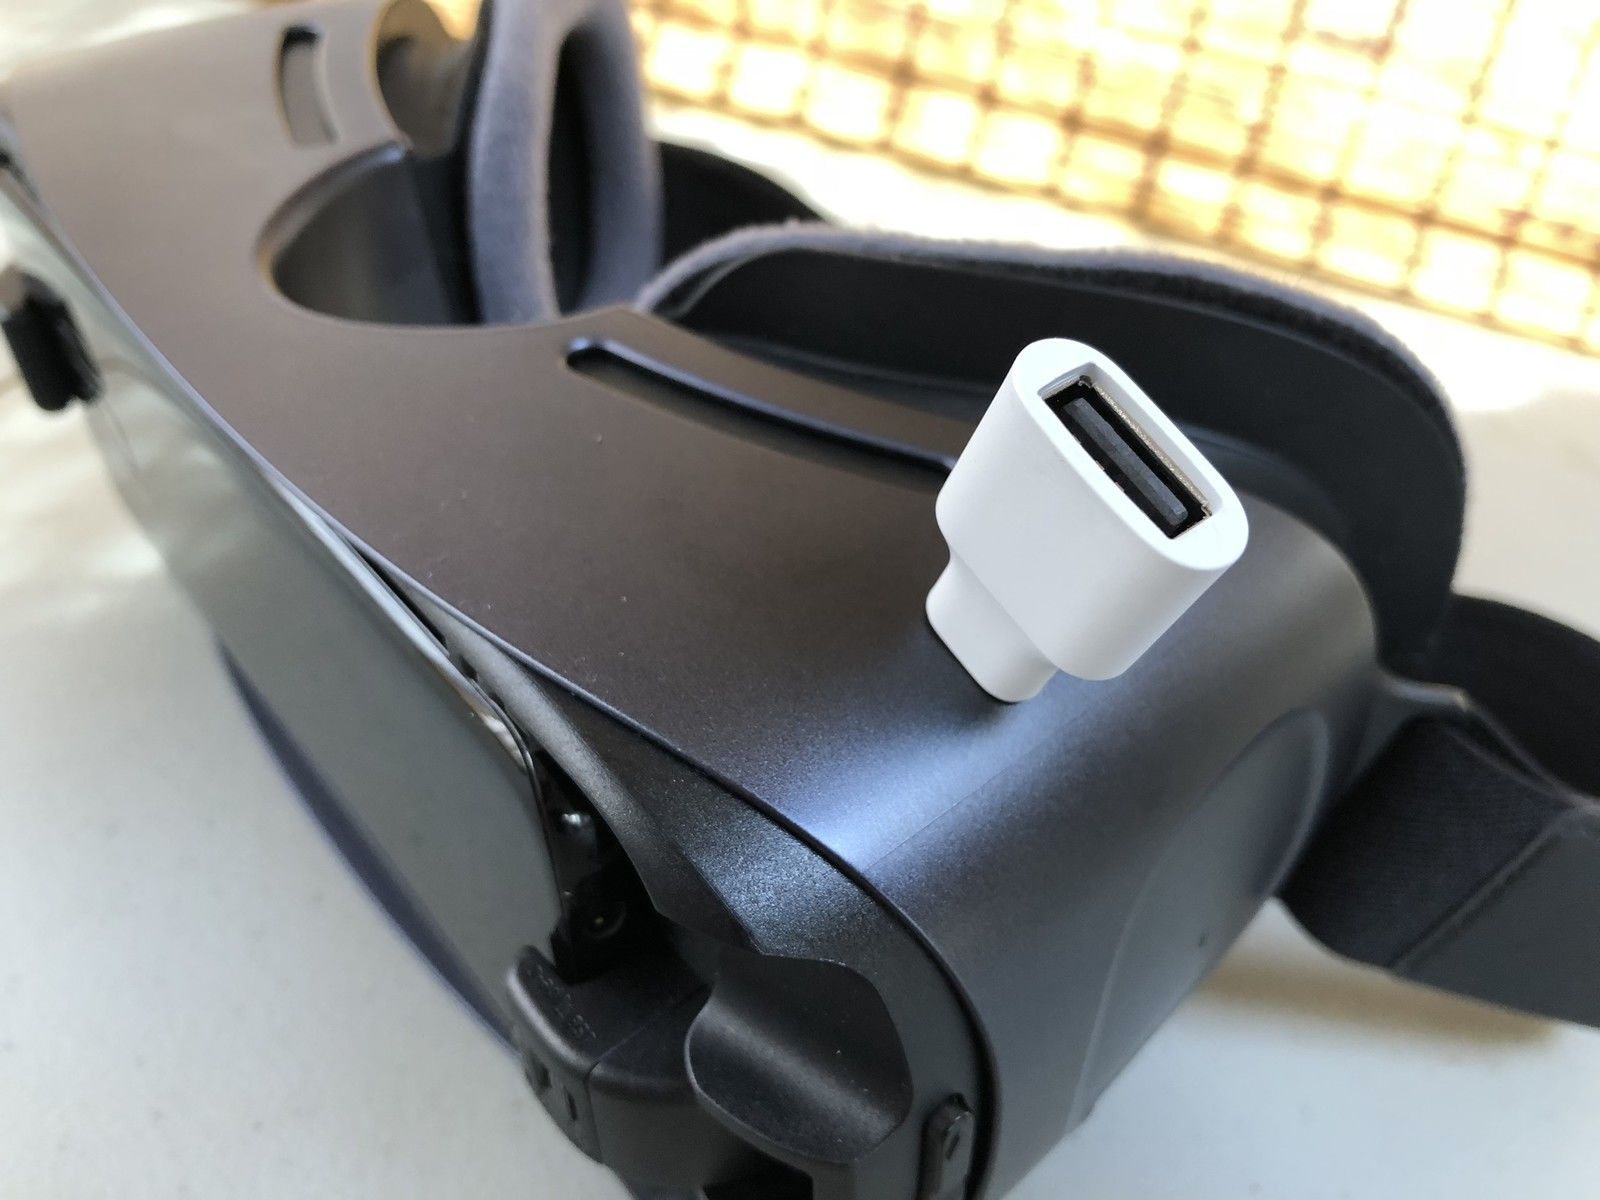 You Can with the USB Port on Samsung Gear VR - VR Geeks